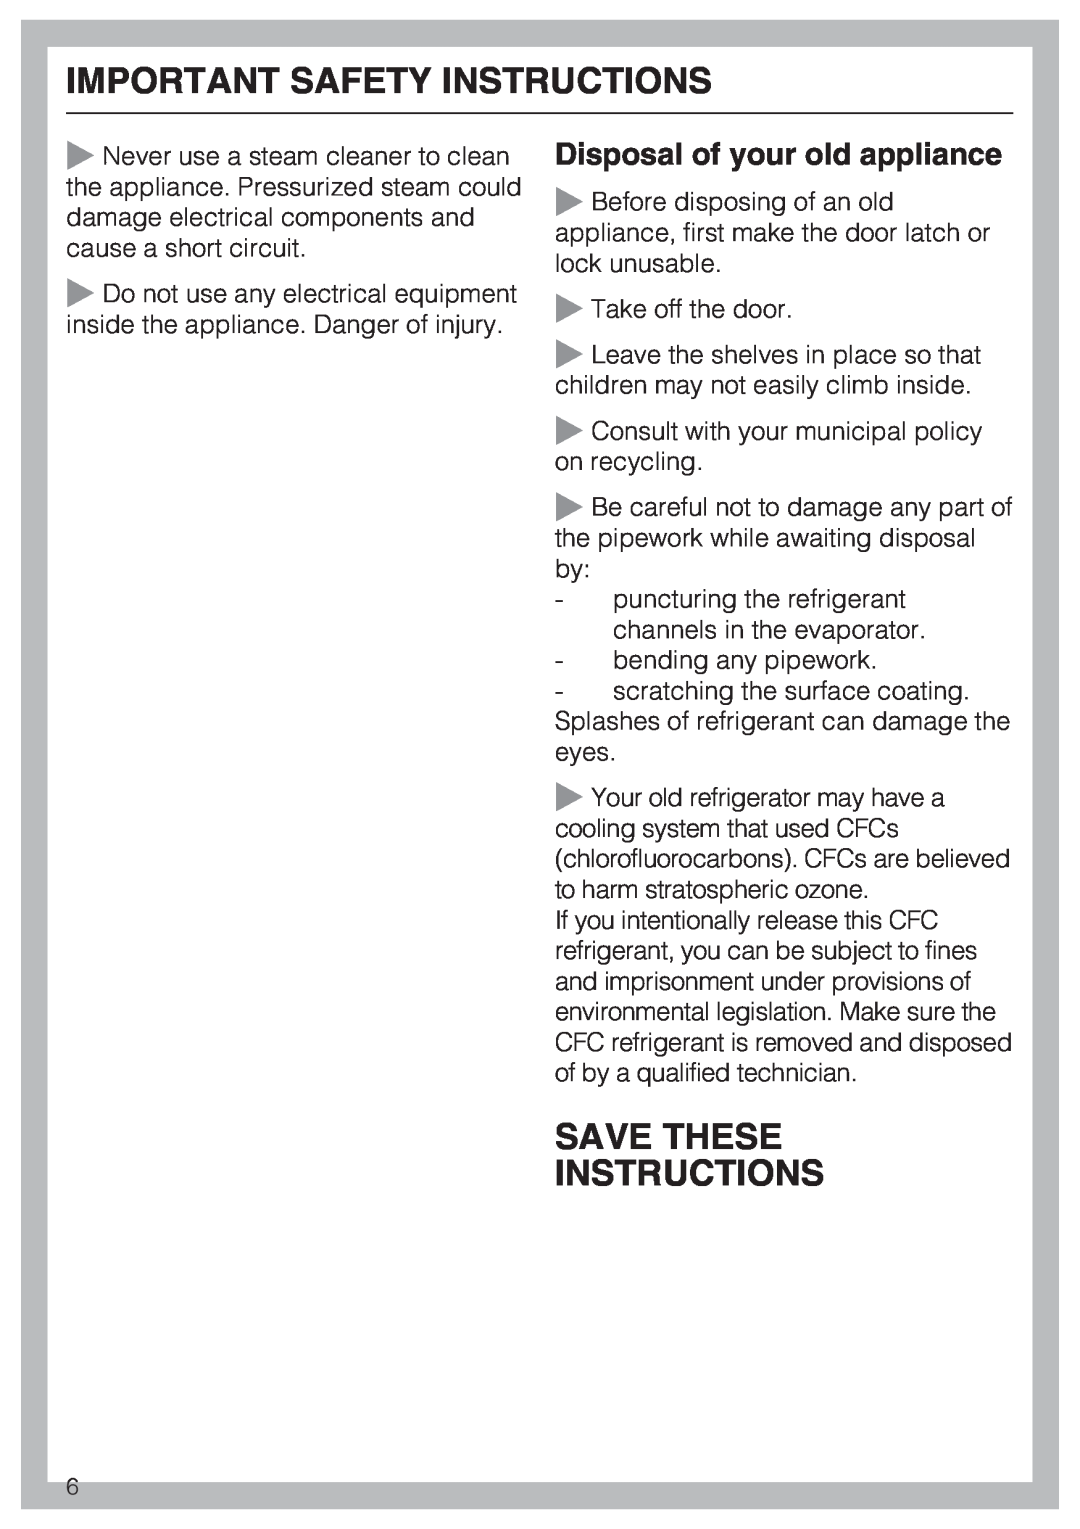 Miele KWT 1601 SF, KWT 1611 SF Save These Instructions, Disposal of your old appliance, Important Safety Instructions 